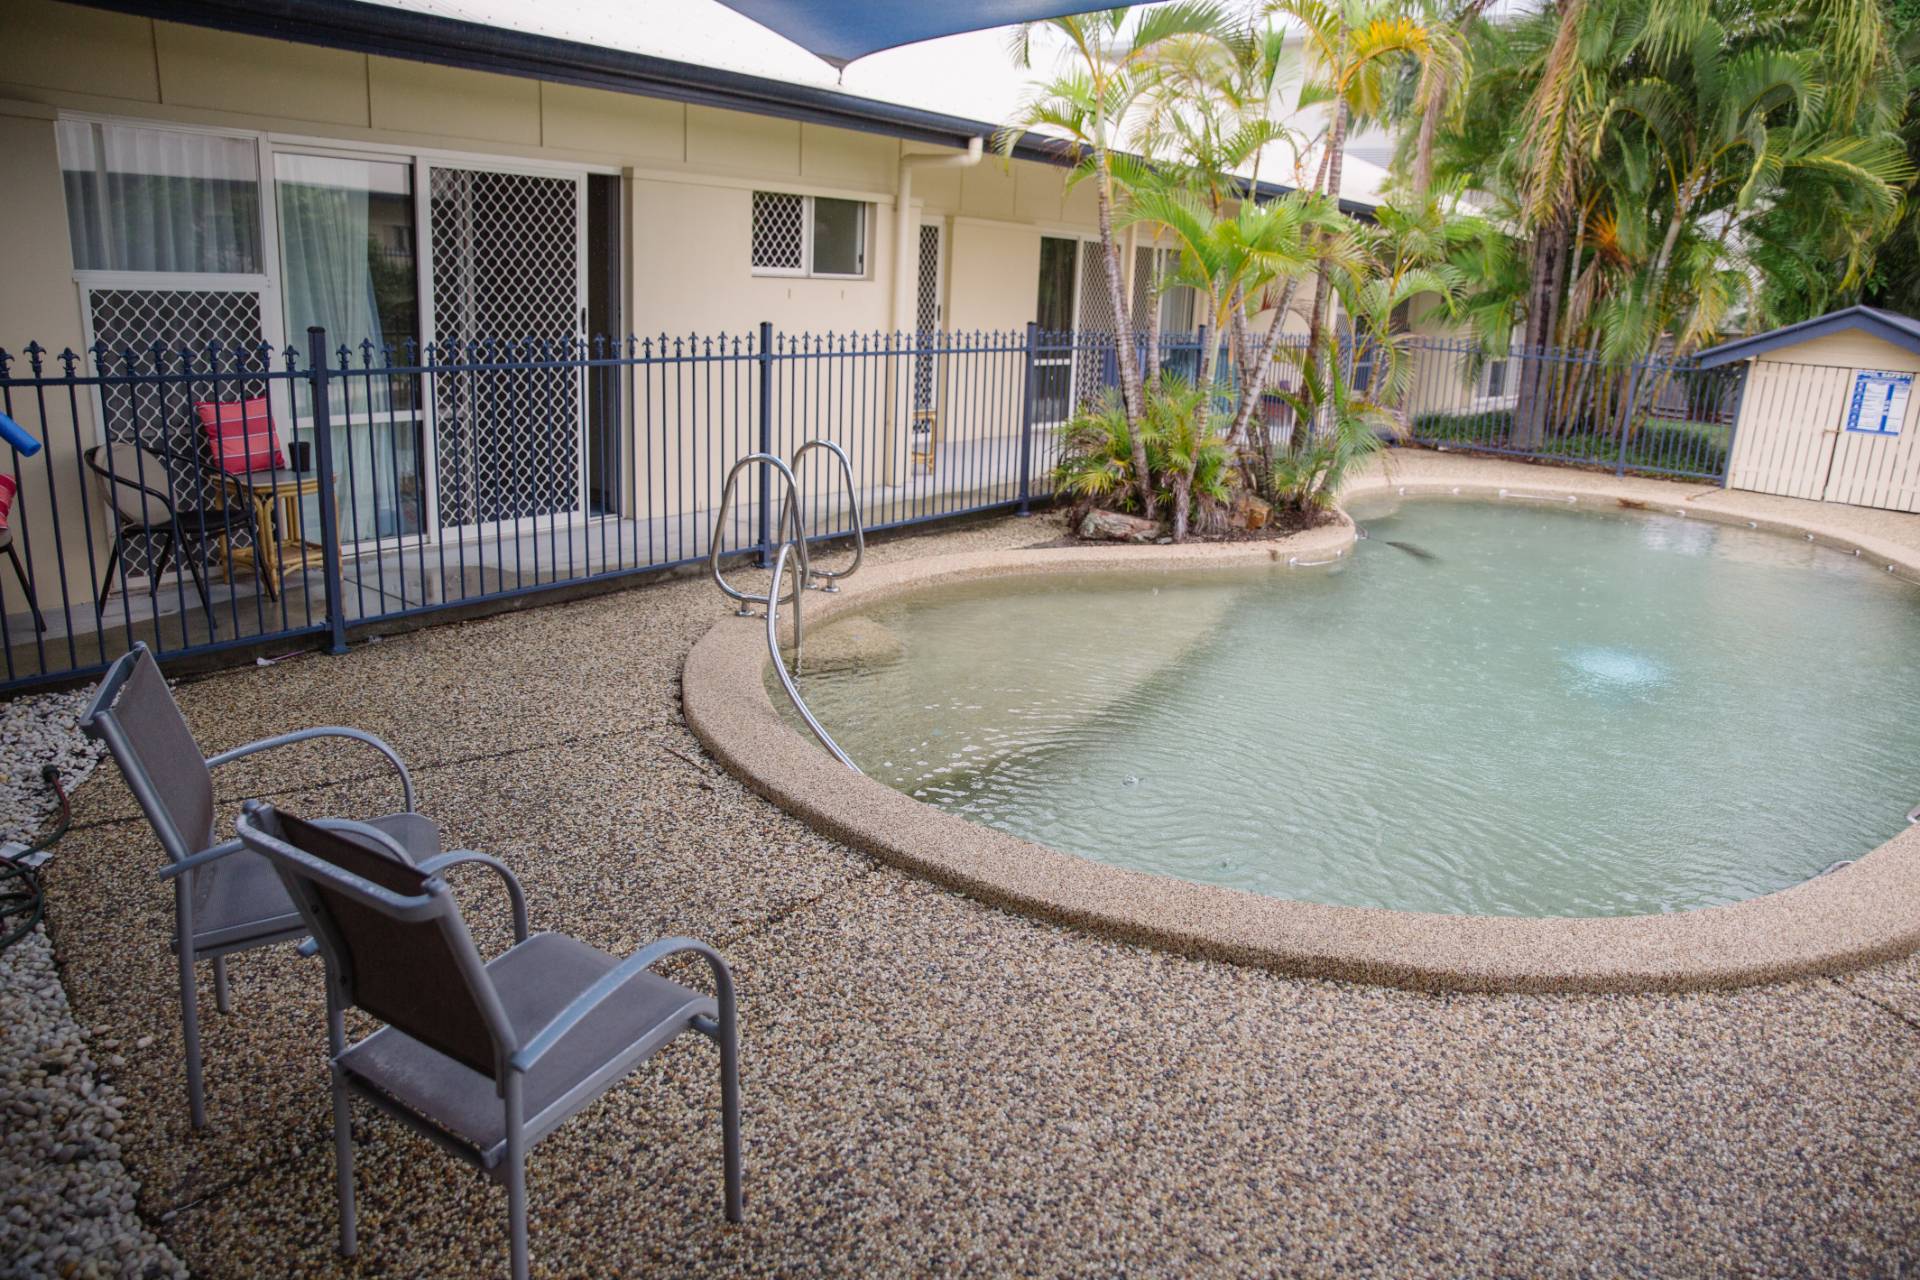 Aged Care Facility Gold Coast Queensland - Keith Turnbull Place